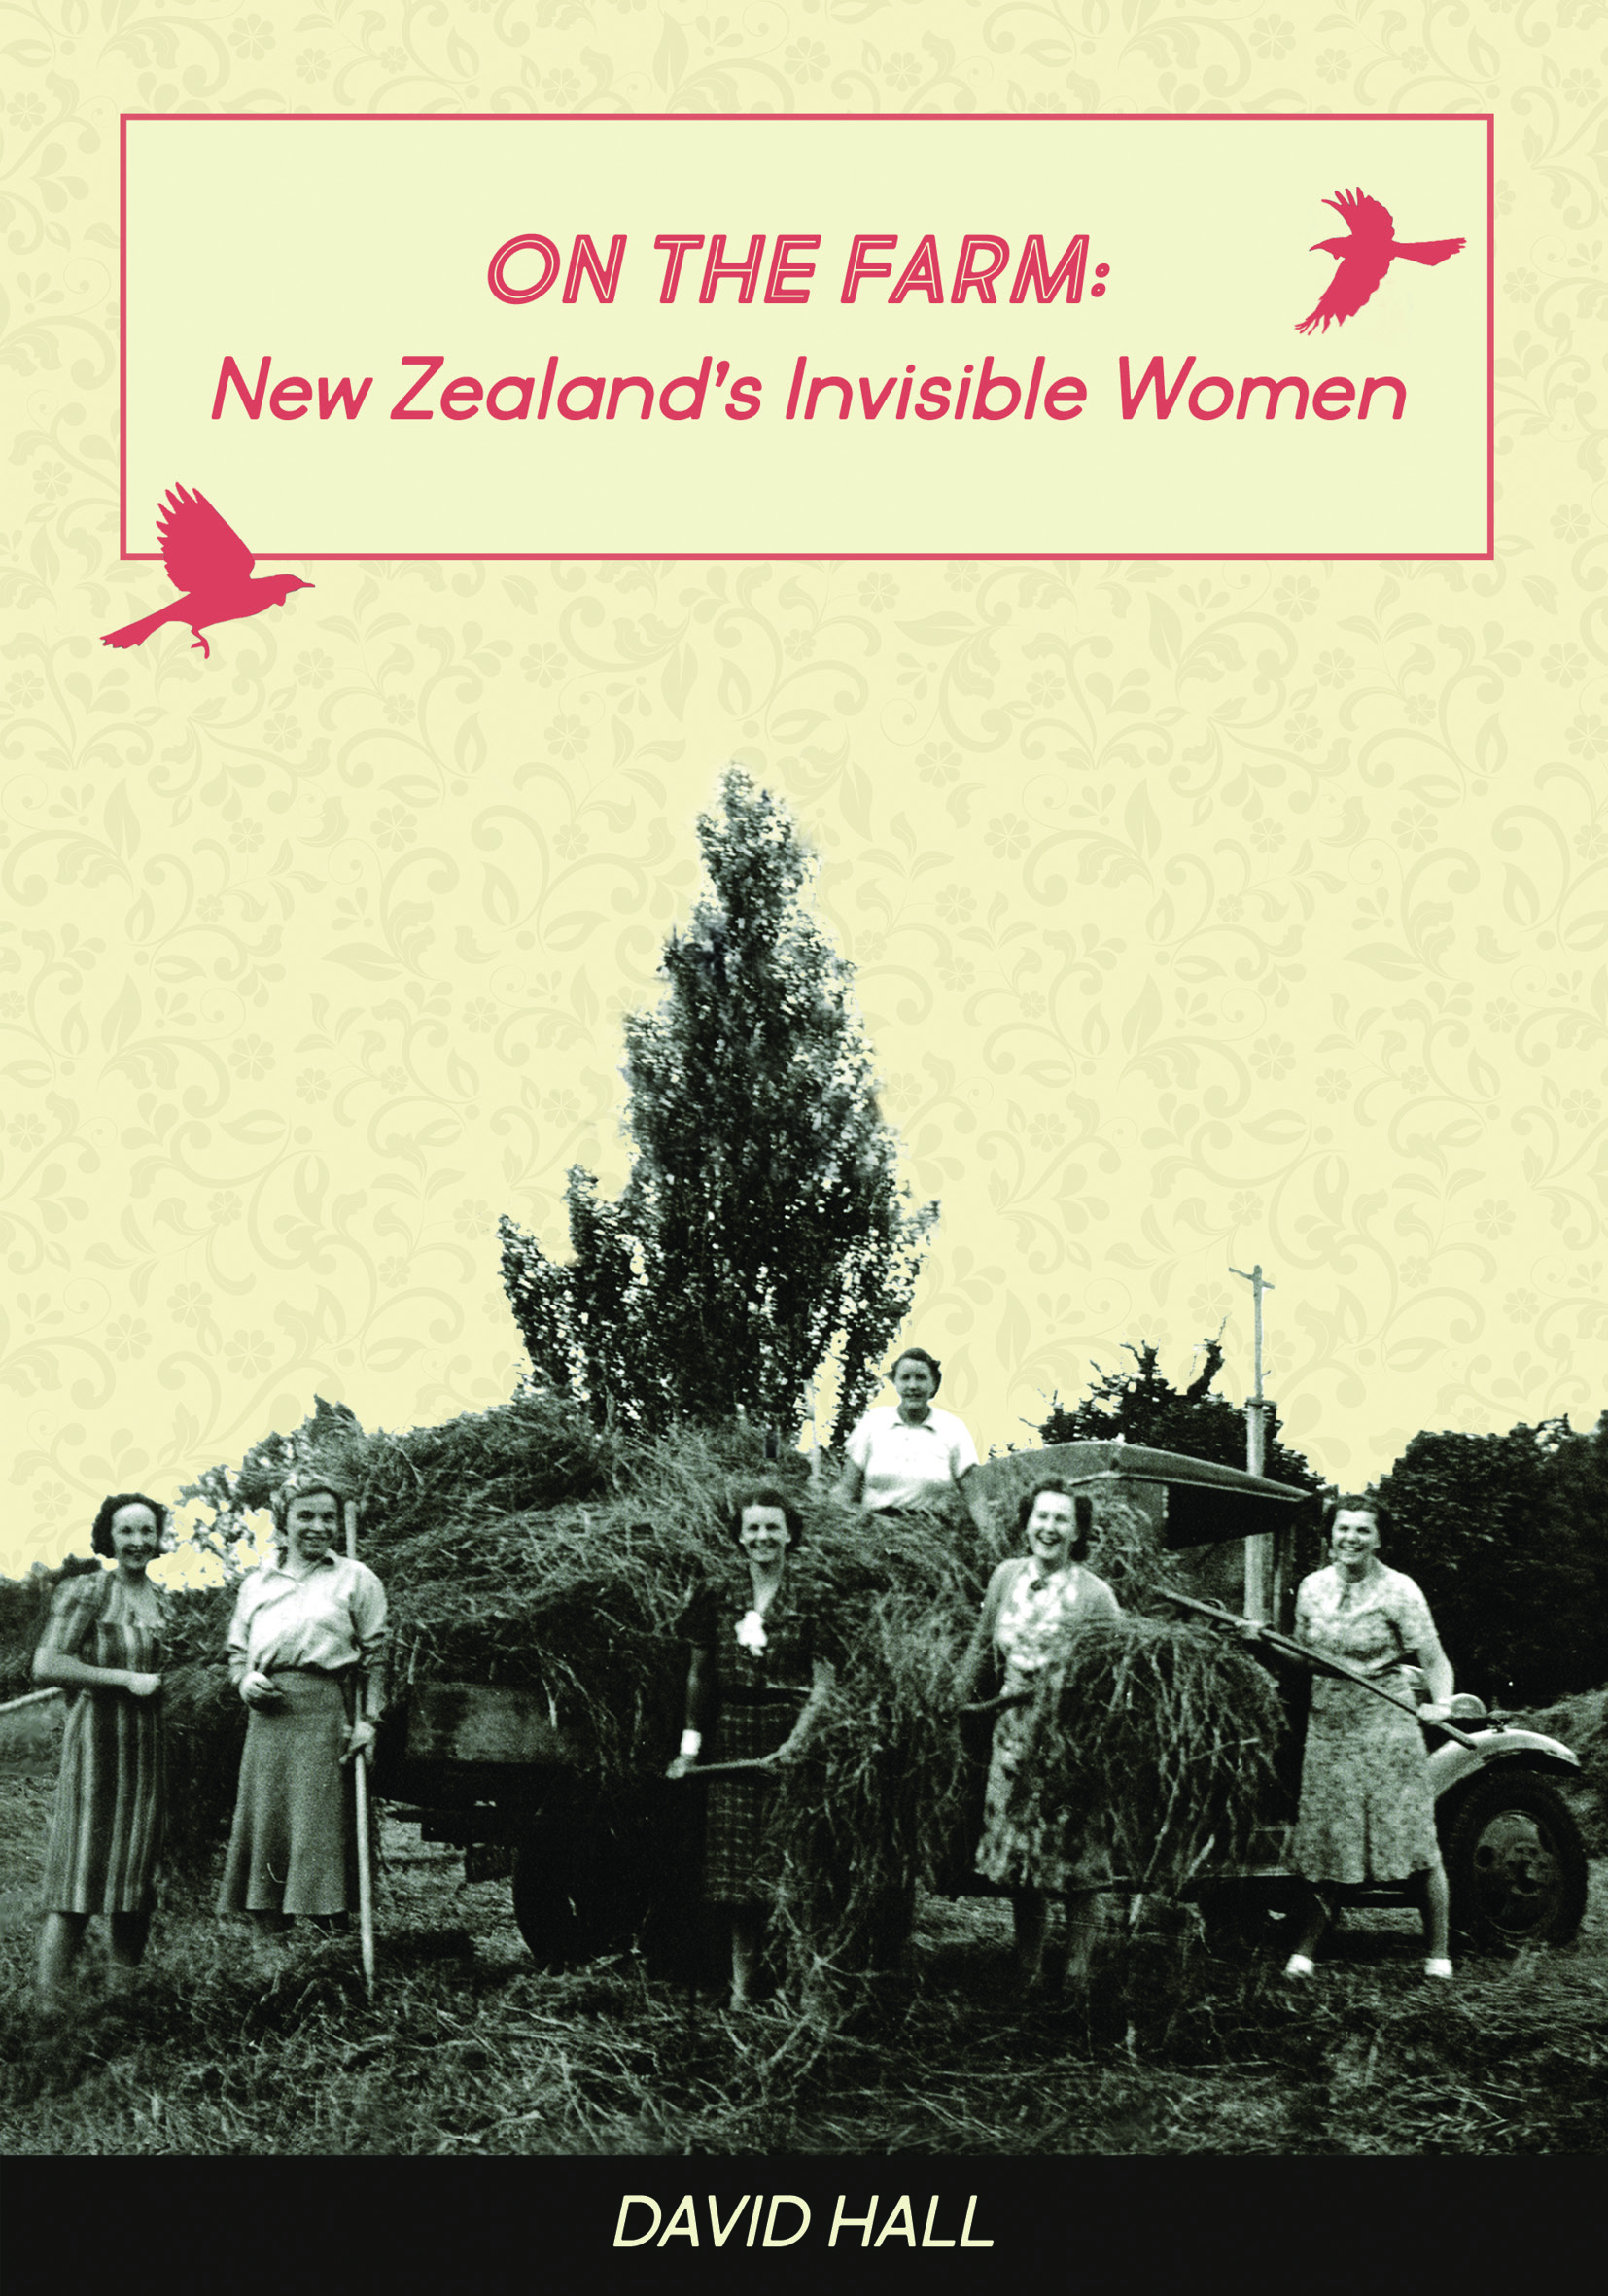 On the Farm: New Zealand's Invisible Women